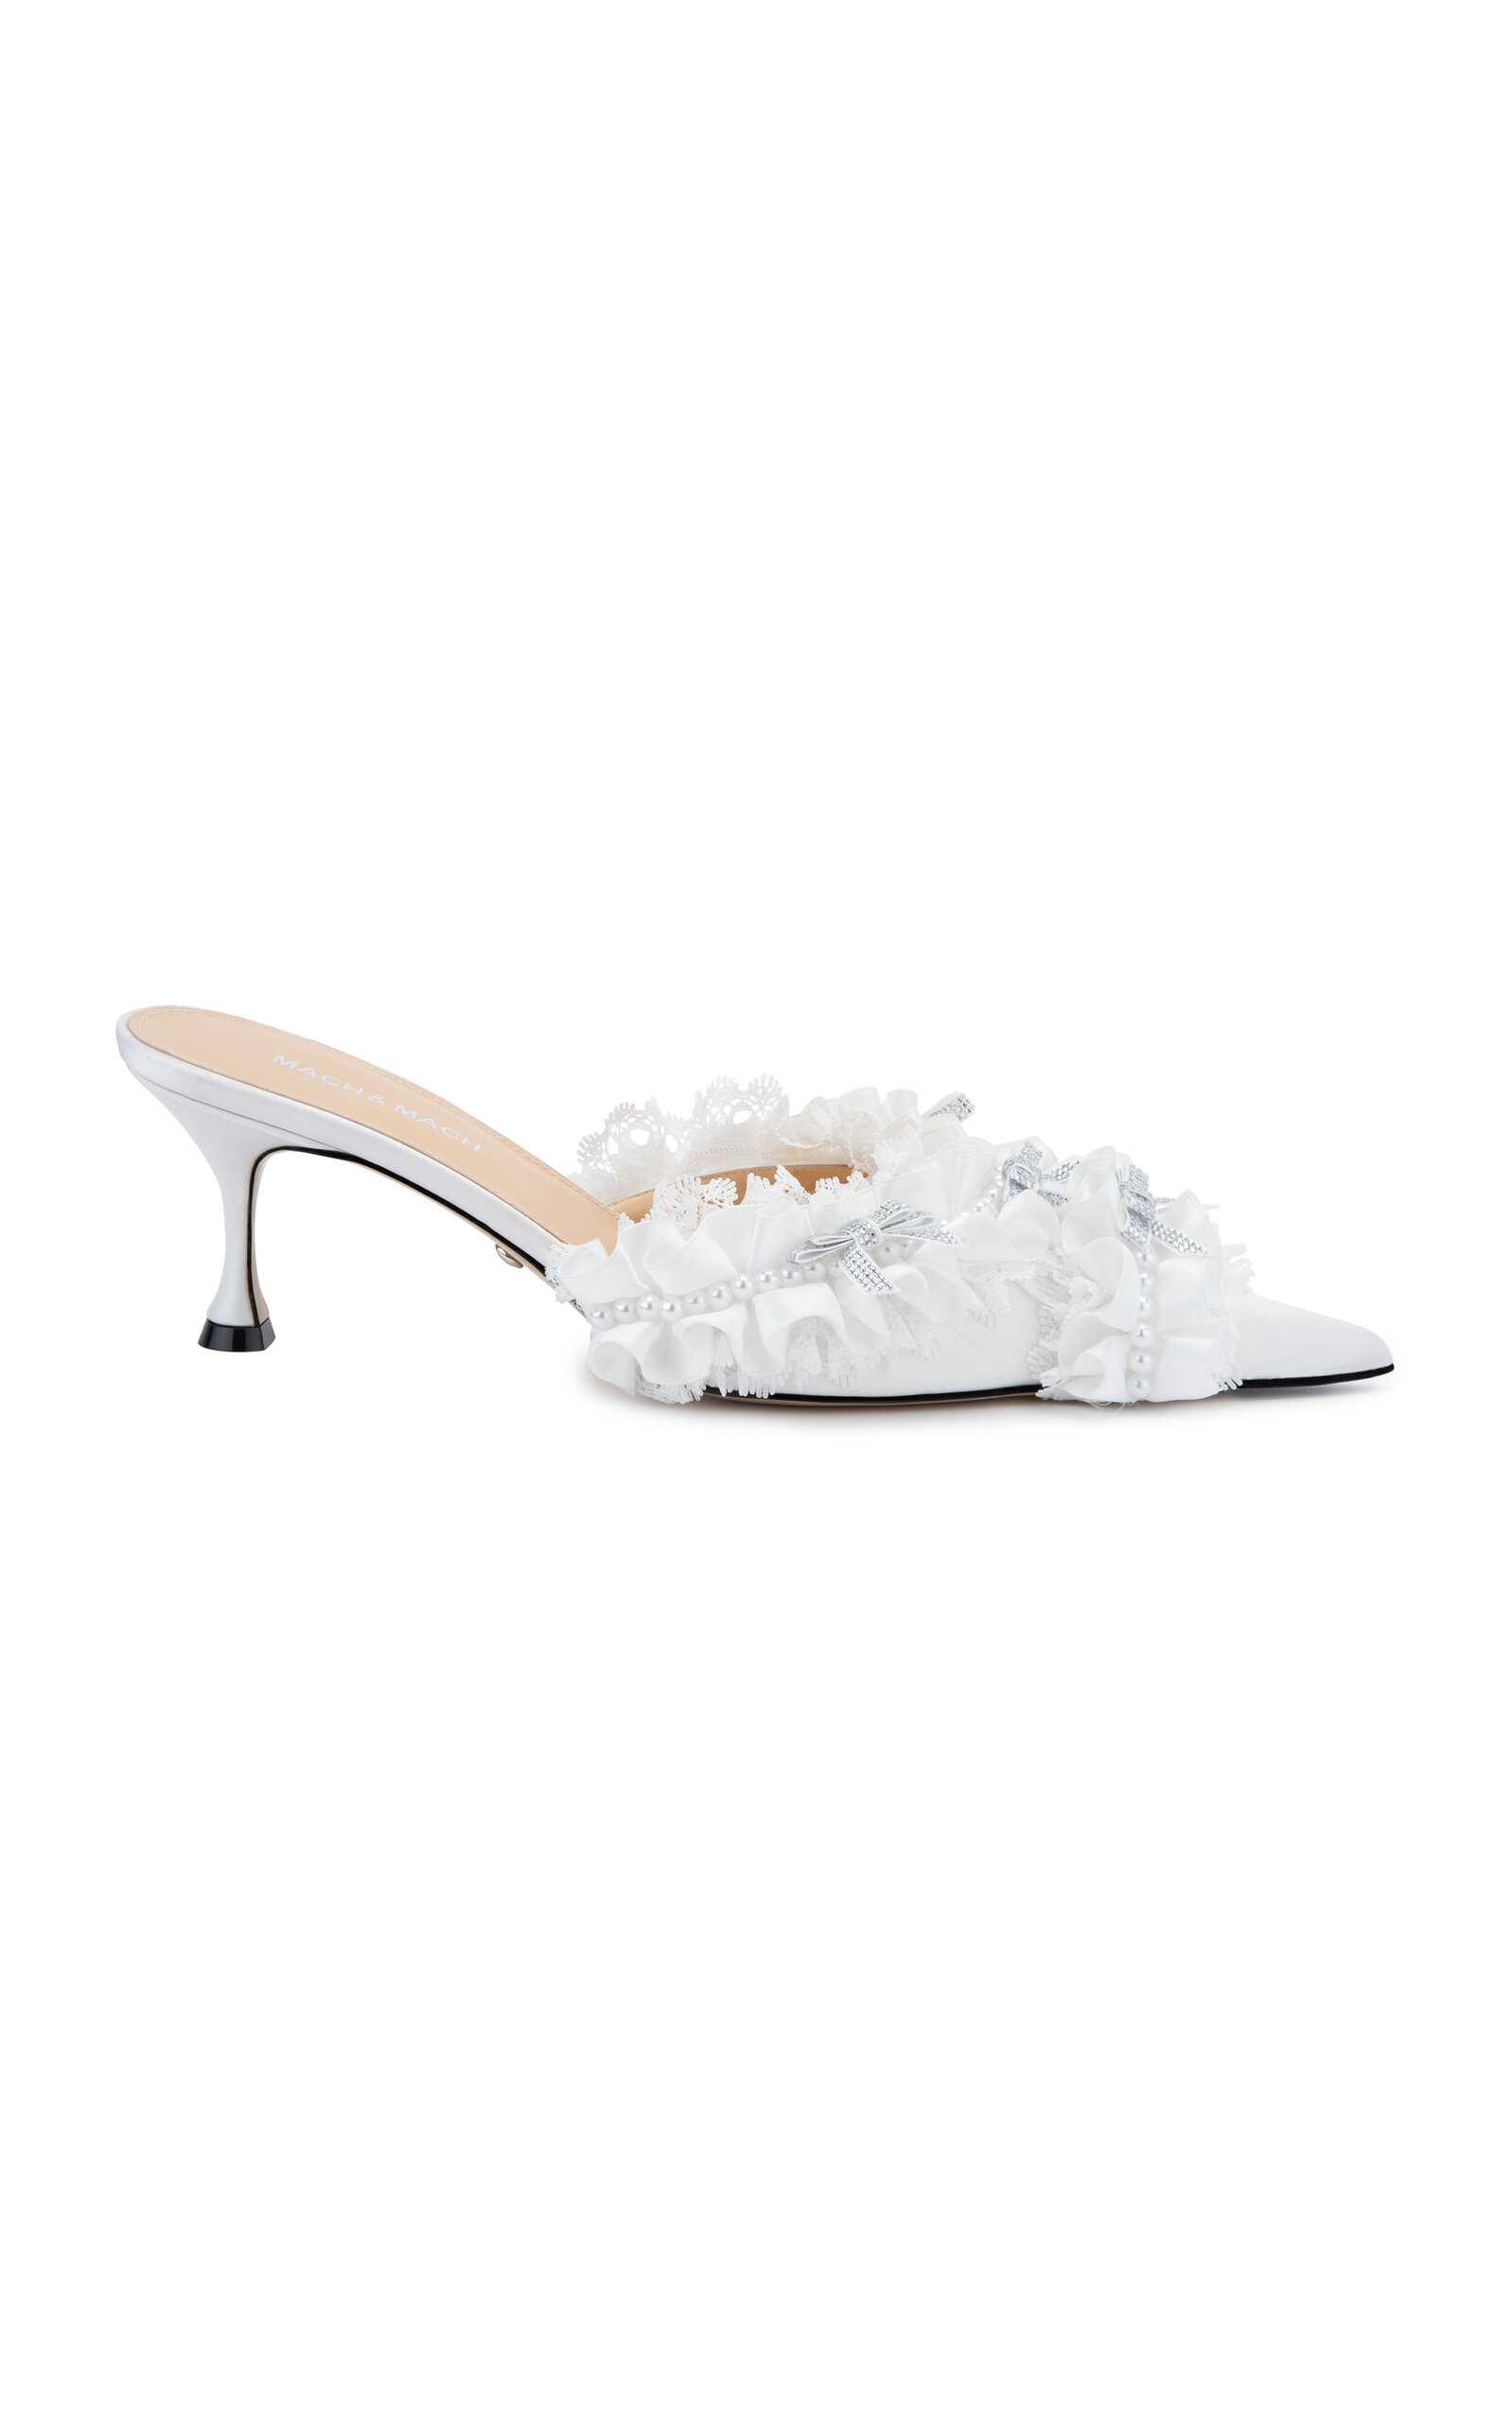 Mach & Mach Beauty Of Antoinette Ruffled Satin Mules In White